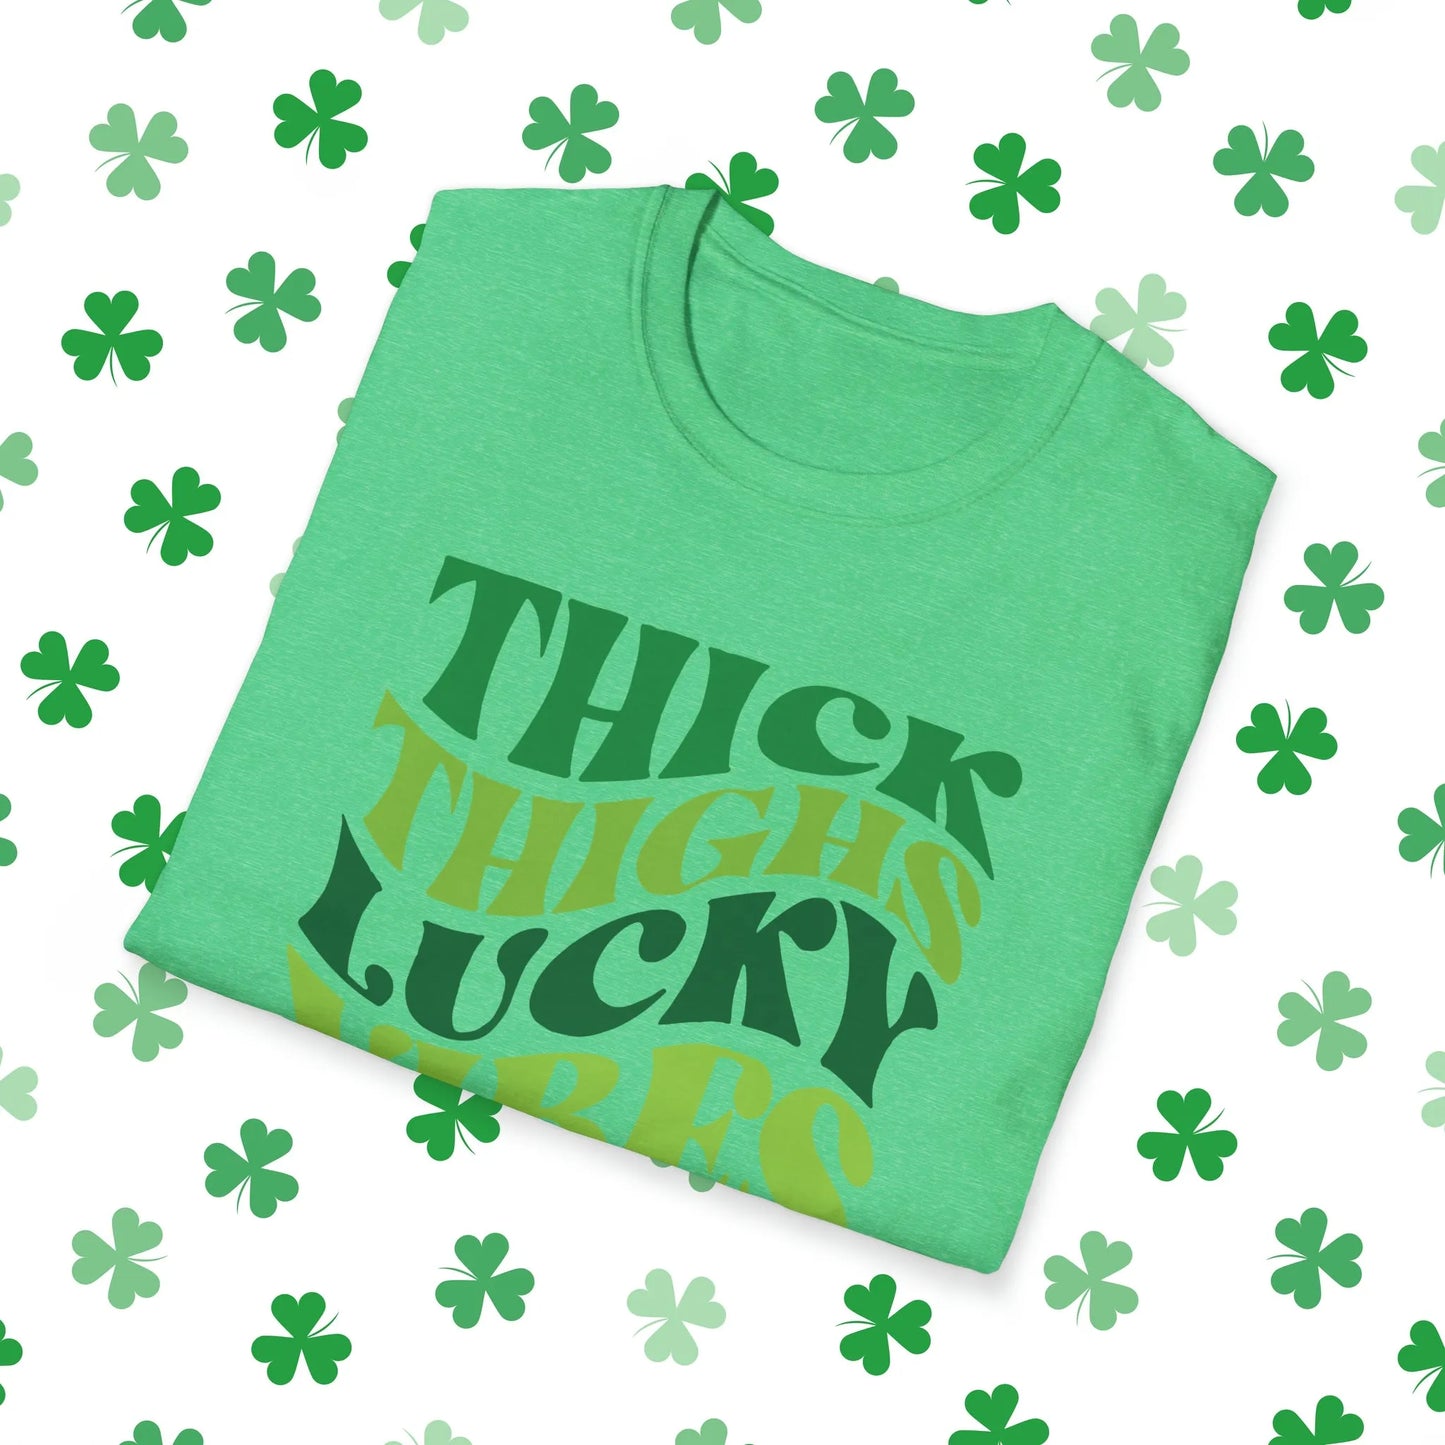 Thick Thighs Lucky Vibes Retro-Style St. Patrick's Day T-Shirt - Comfort & Charm - Thick Thighs Lucky Vibes St. Patrick's Day Shirt